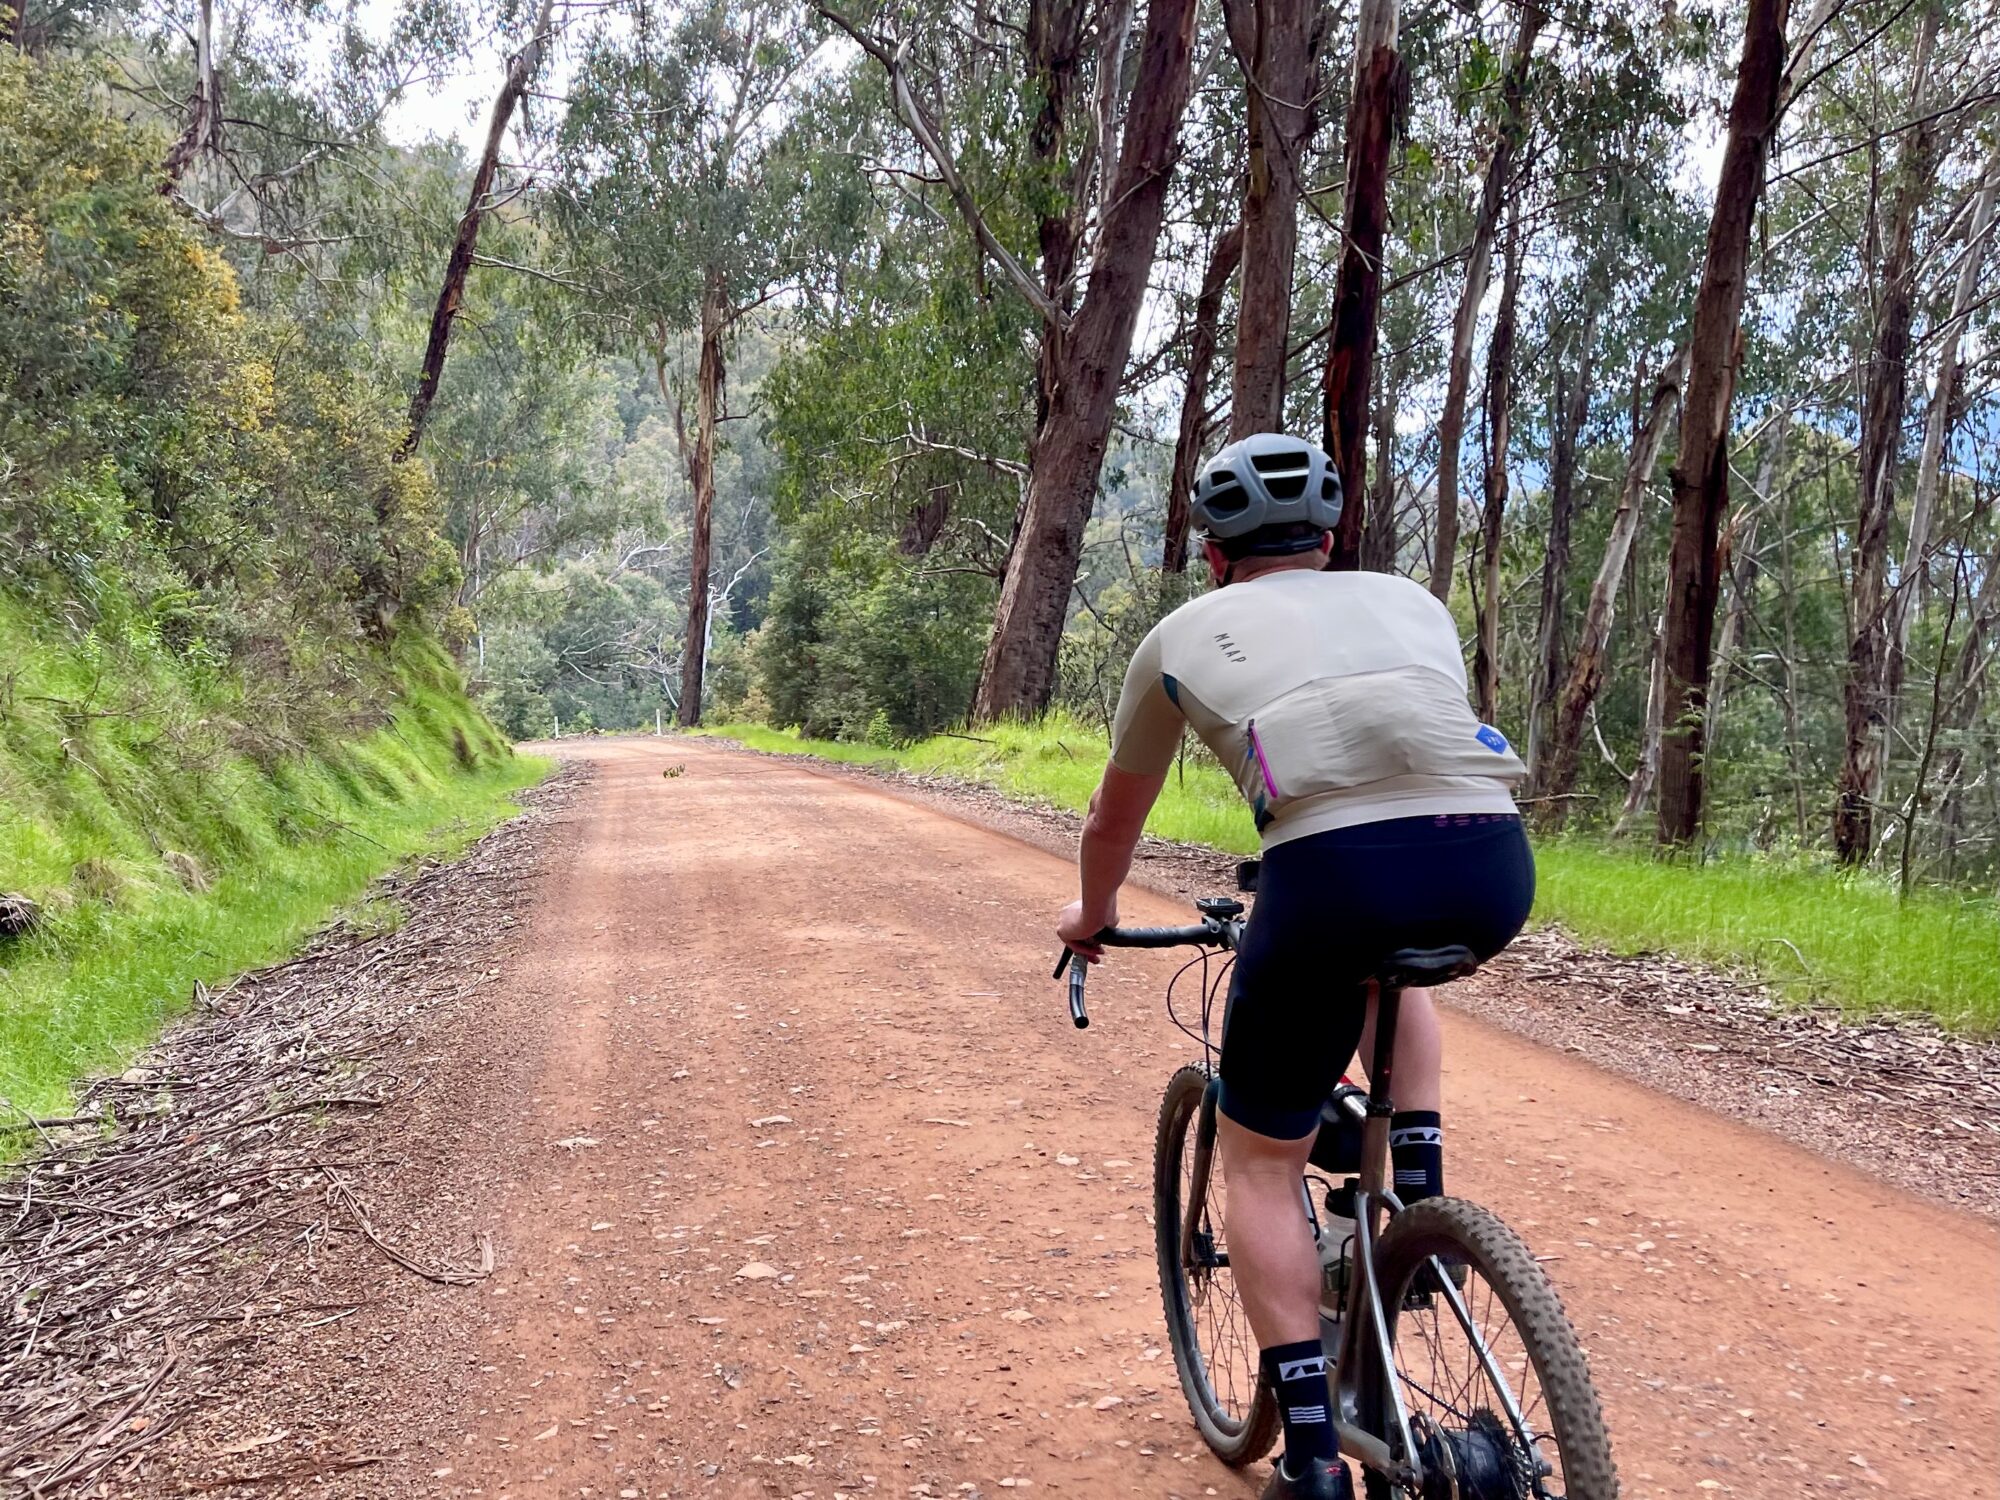 Cyclist riding on a smooth dirt road surrounded by a green lush native bushland